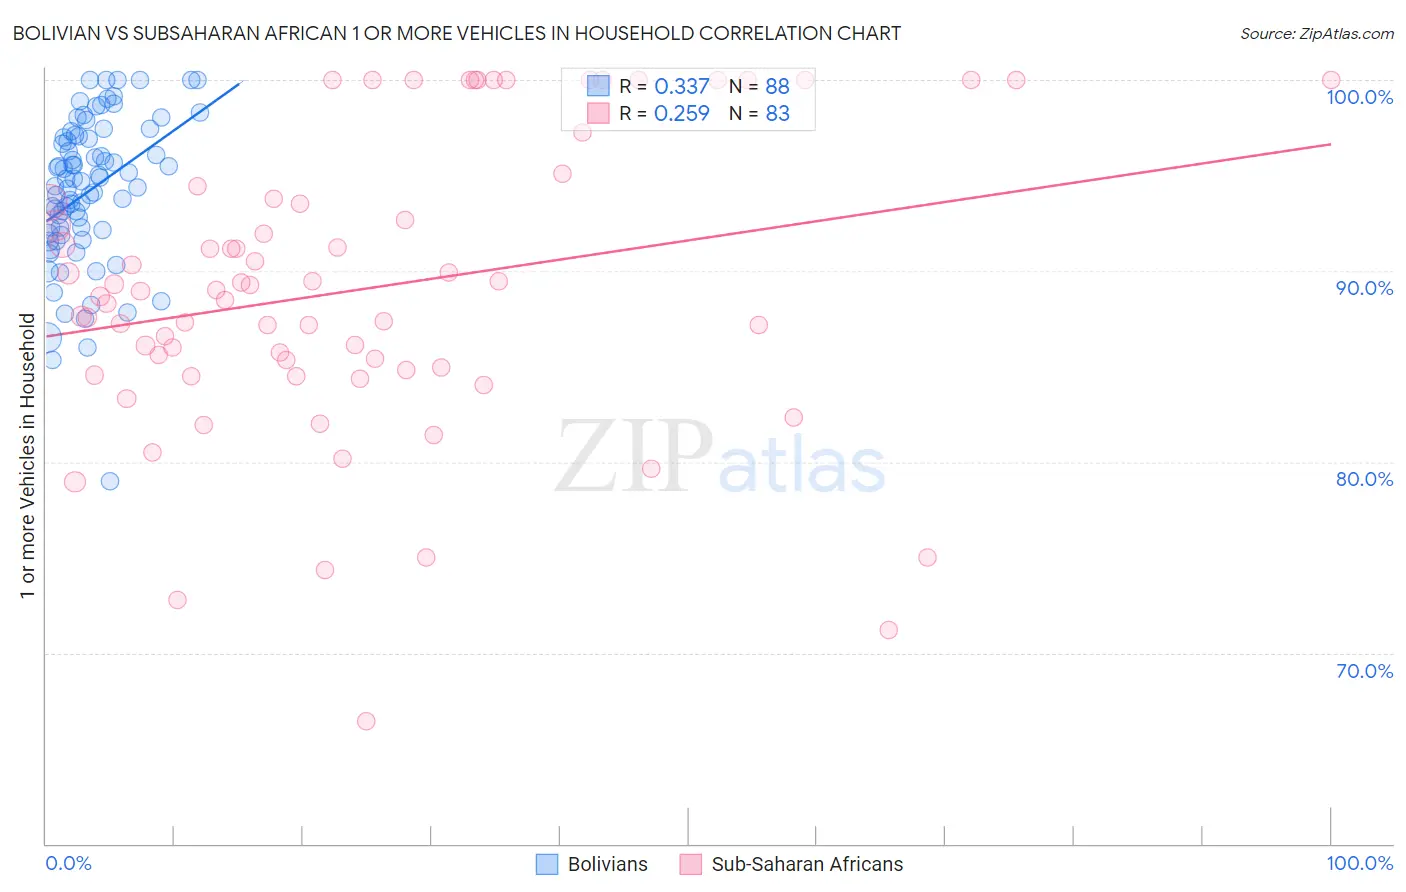 Bolivian vs Subsaharan African 1 or more Vehicles in Household